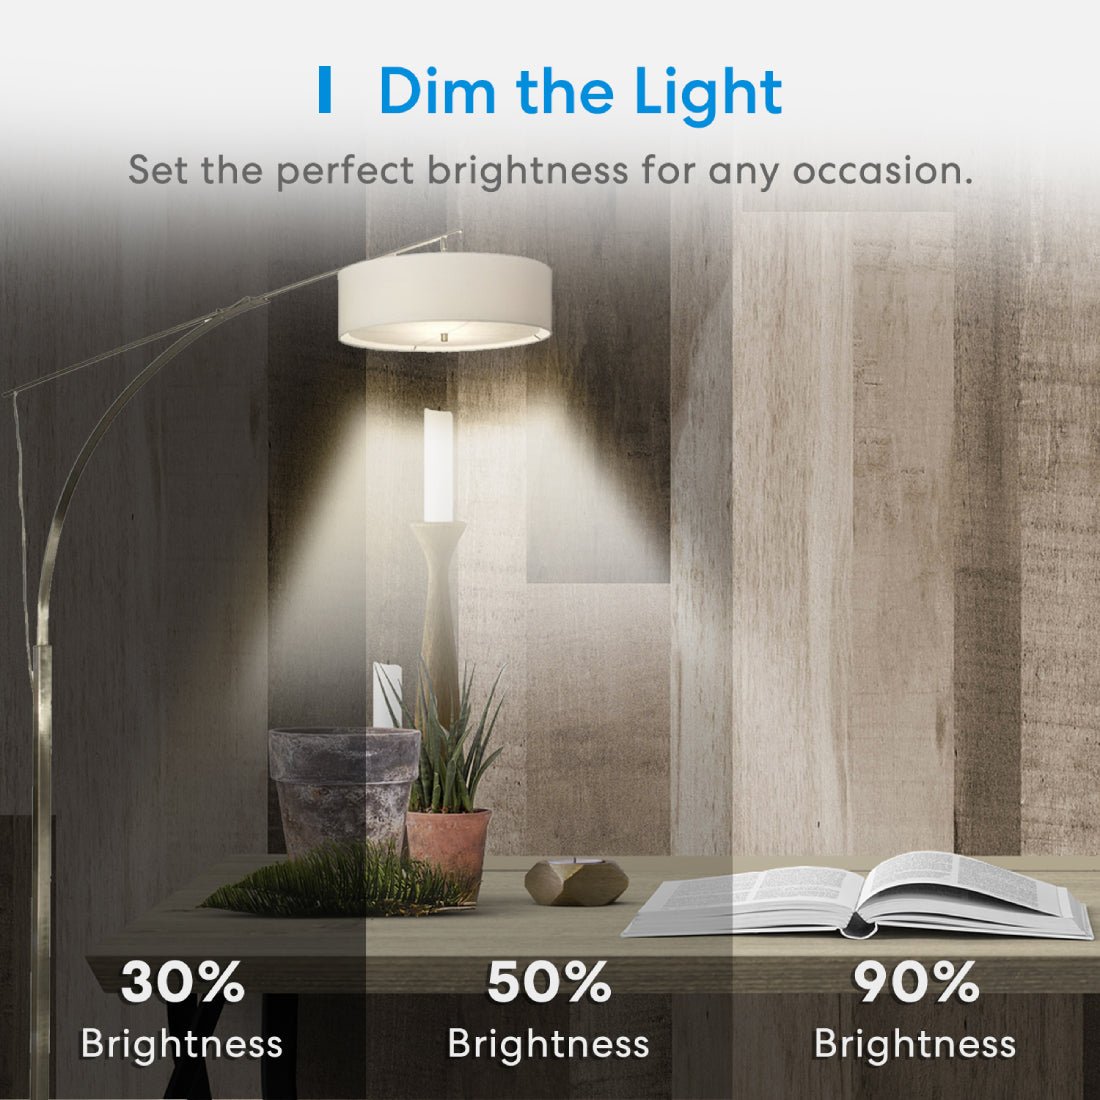 Meross Smart LED Light Bulb With Dimmable Light - 1 Pack - إضاءة - Store 974 | ستور ٩٧٤